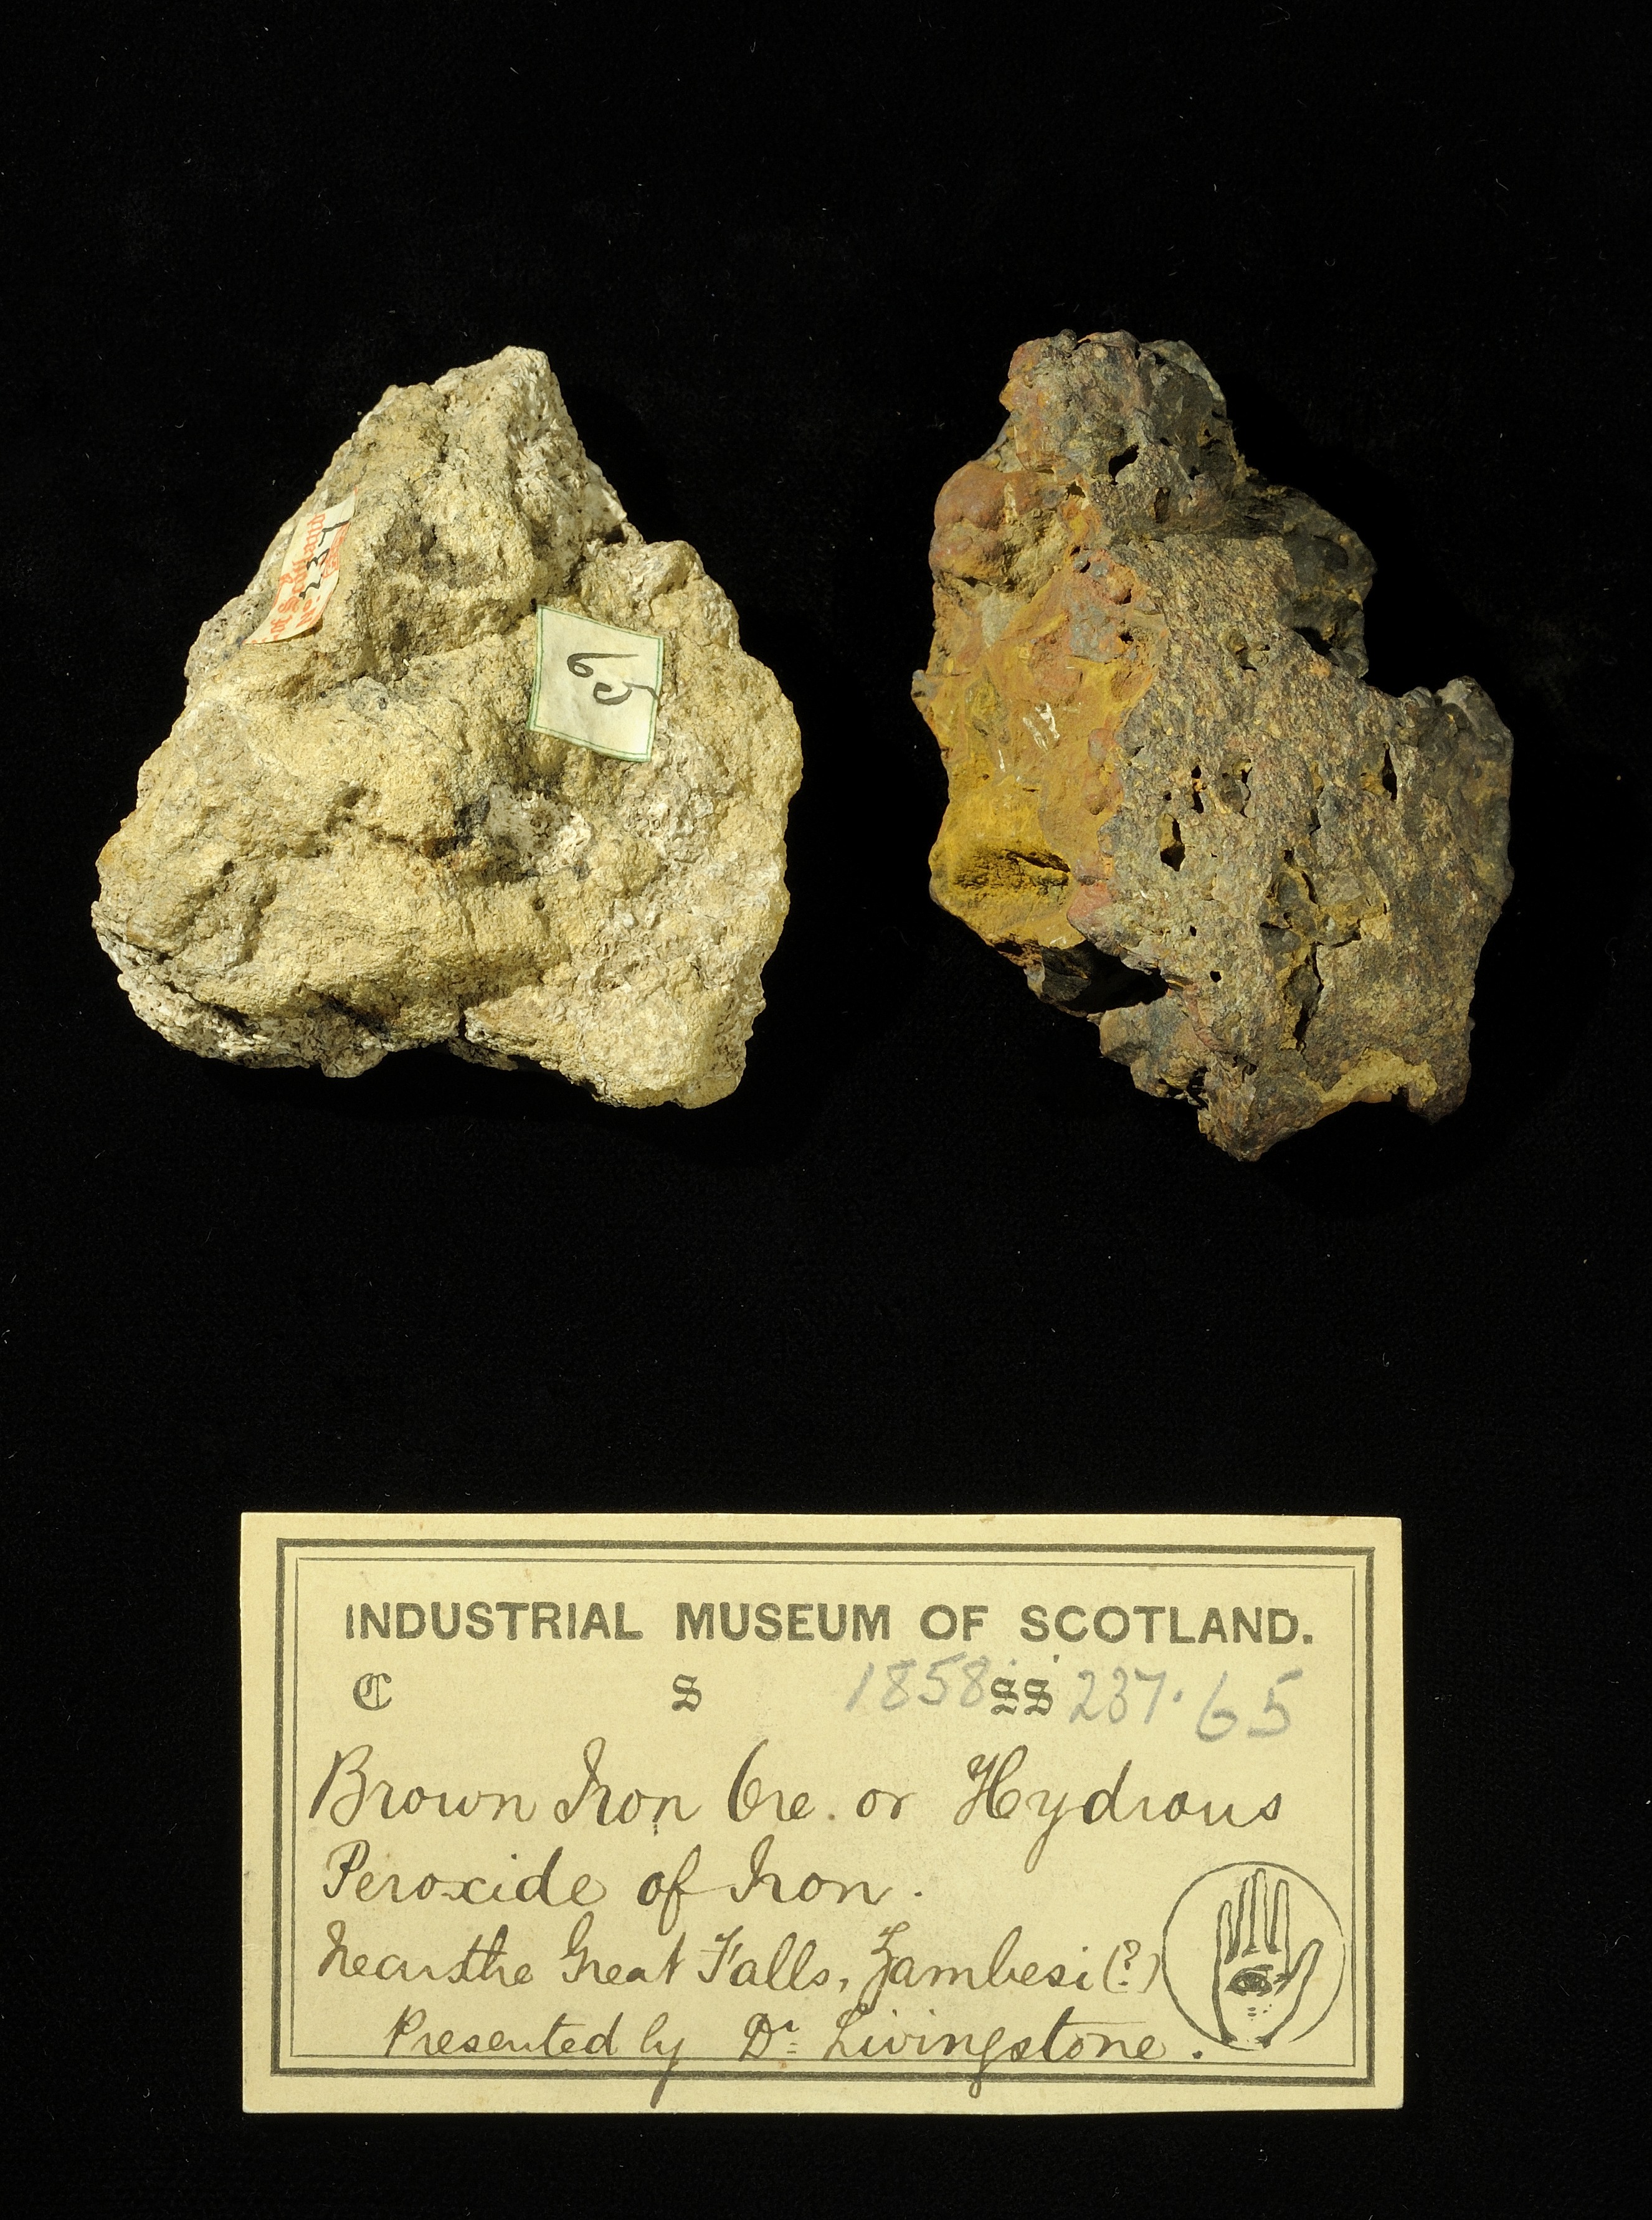 Specimens of iron ore with 19th century museum label: ‘Brown iron ore or hydrous peroxide of iron. Near the Great Falls, Zambesi (?) Presented by Dr Livingstone.’